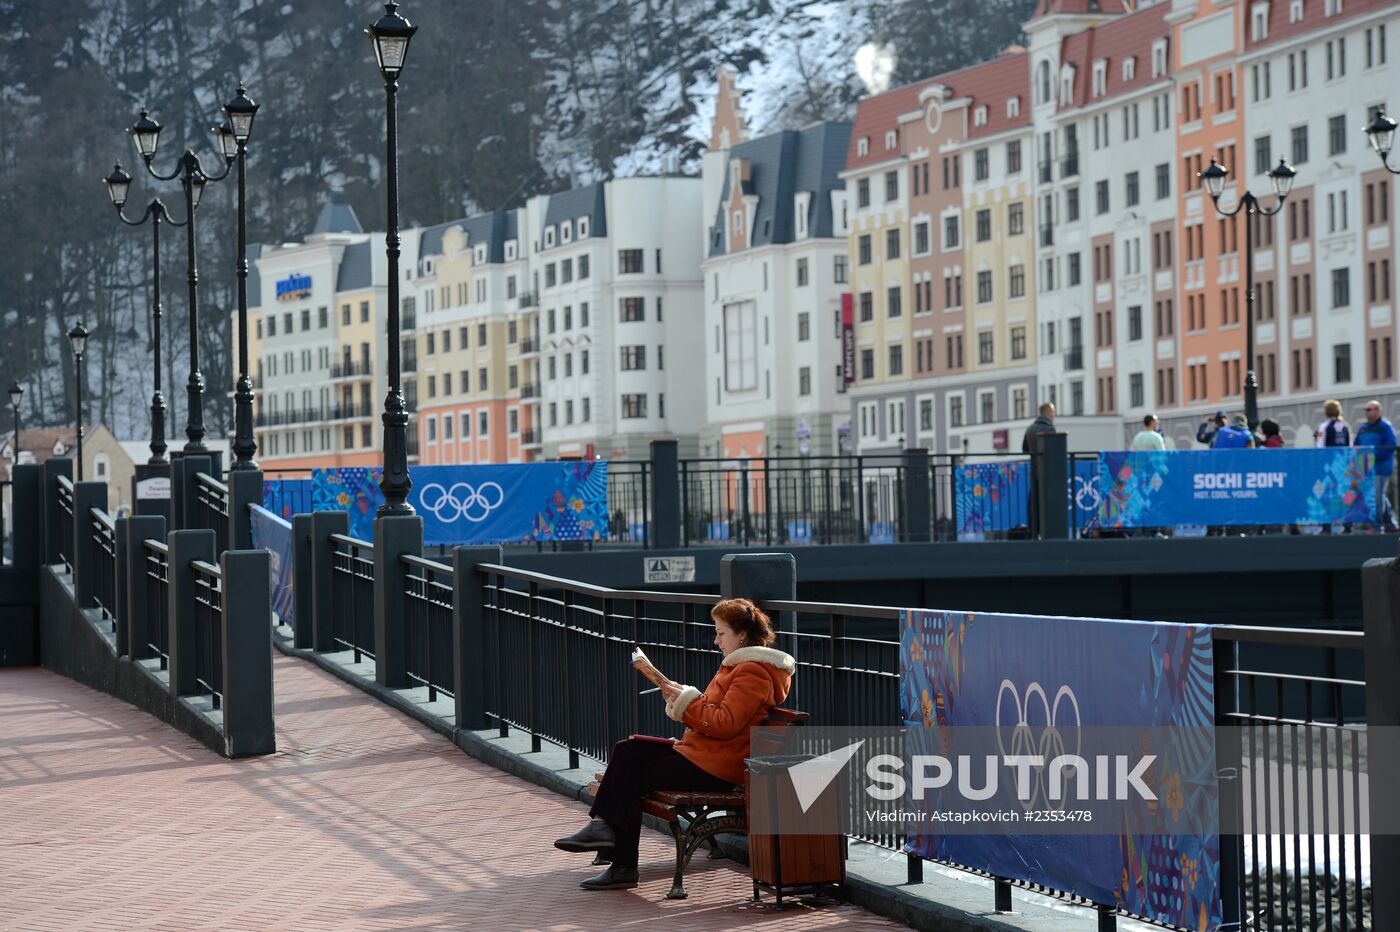 Sochi readies to welcome Winter Olympics